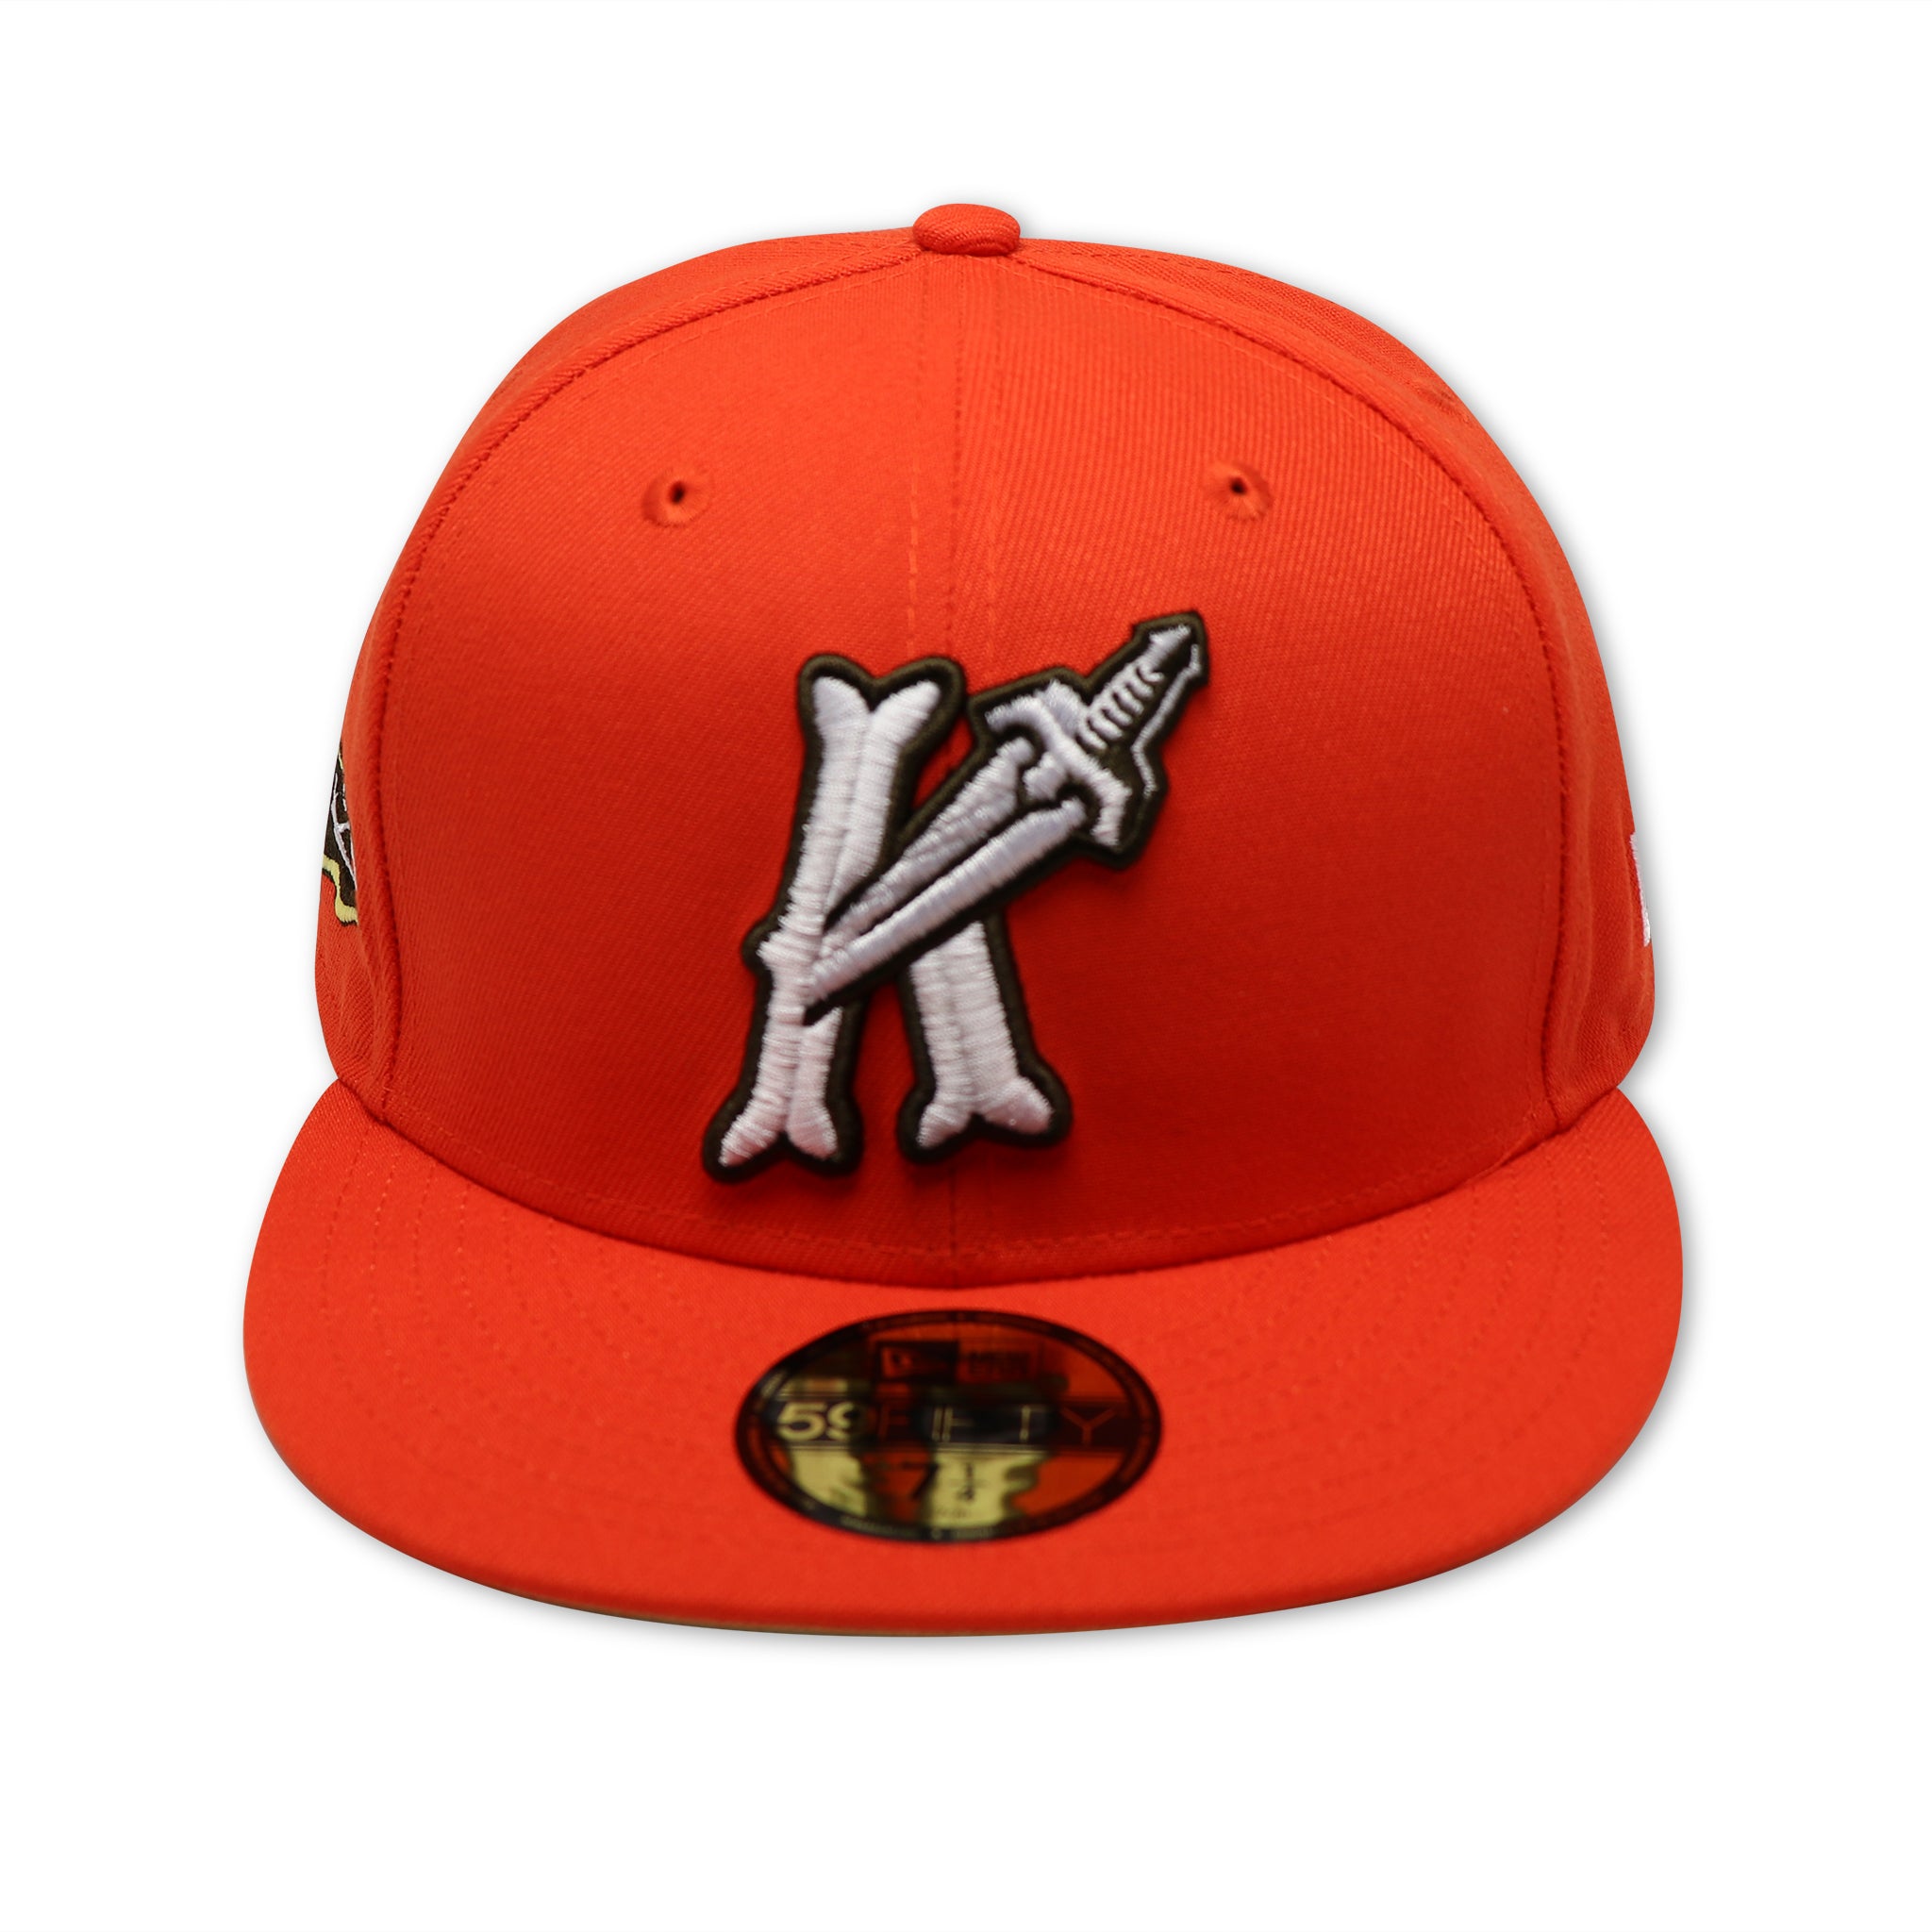 CHARLOTTE KNIGHTS NEW ERA 59FIFTY FITTED (V-GOLD UNDER VISOR)